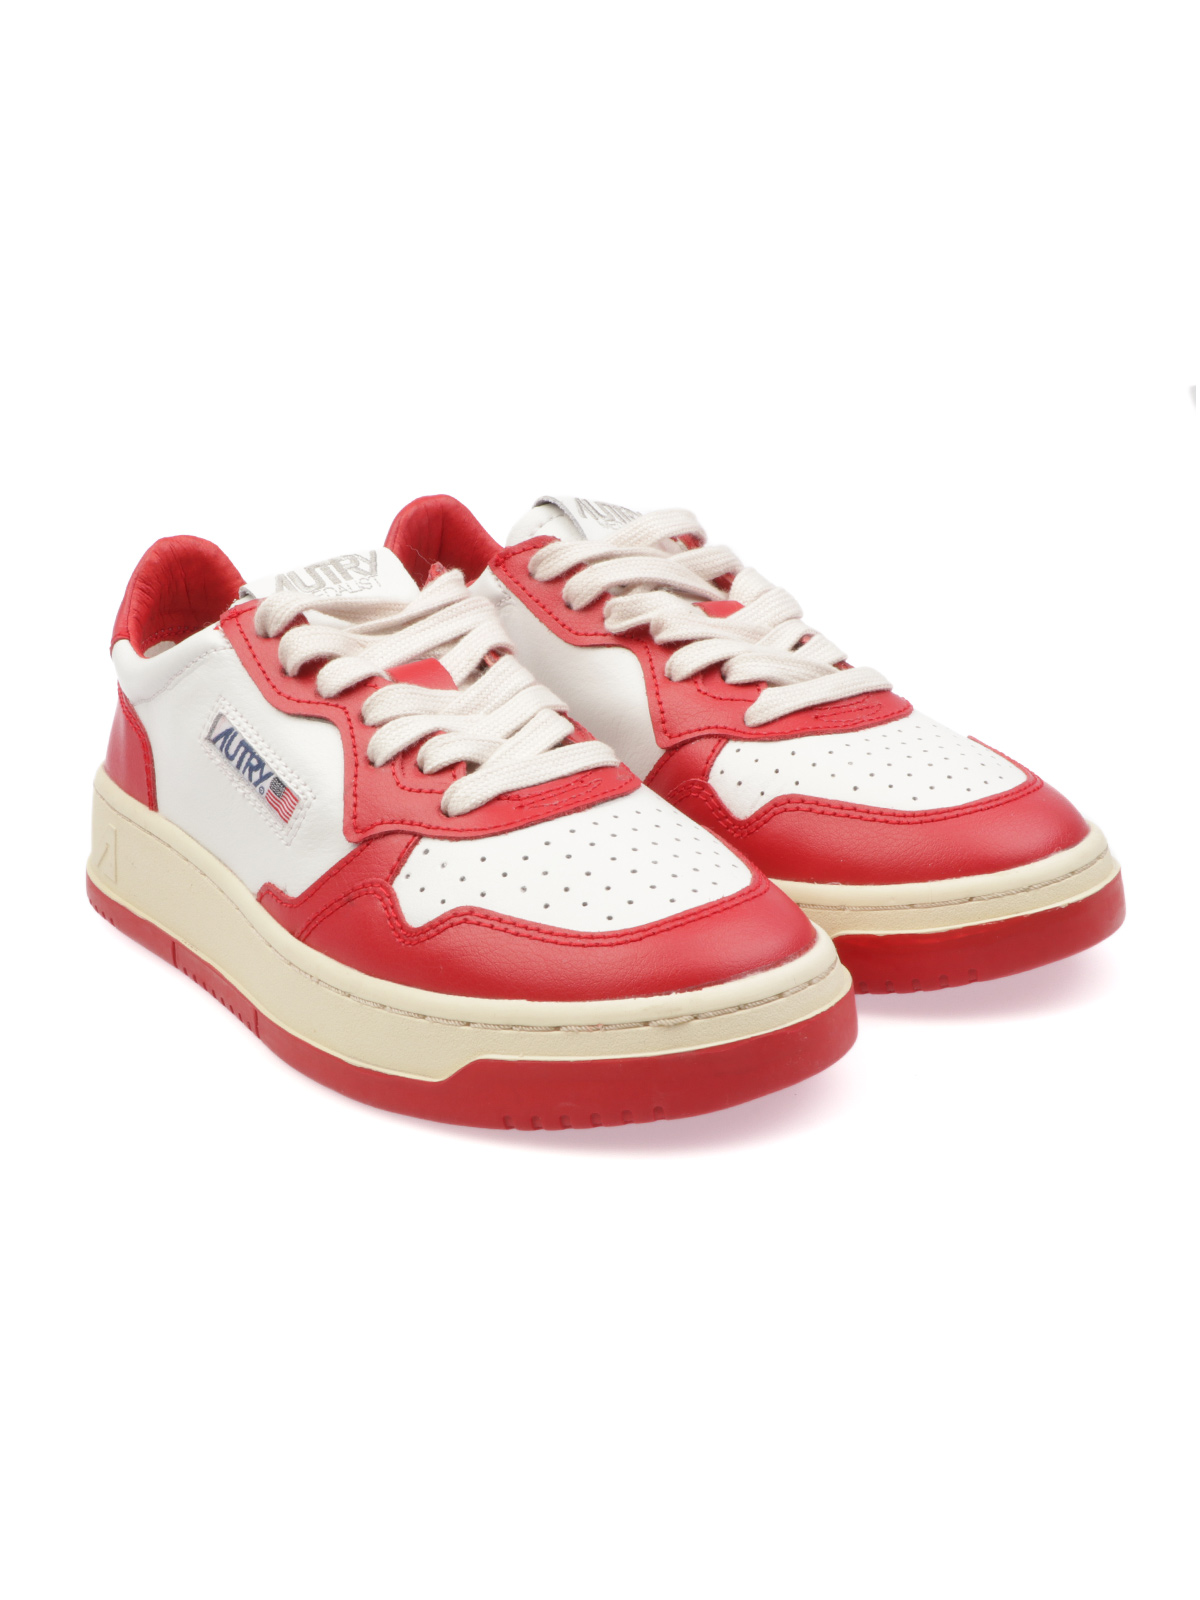 Immagine di AUTRY | Sneakers Donna AULW in Pelle